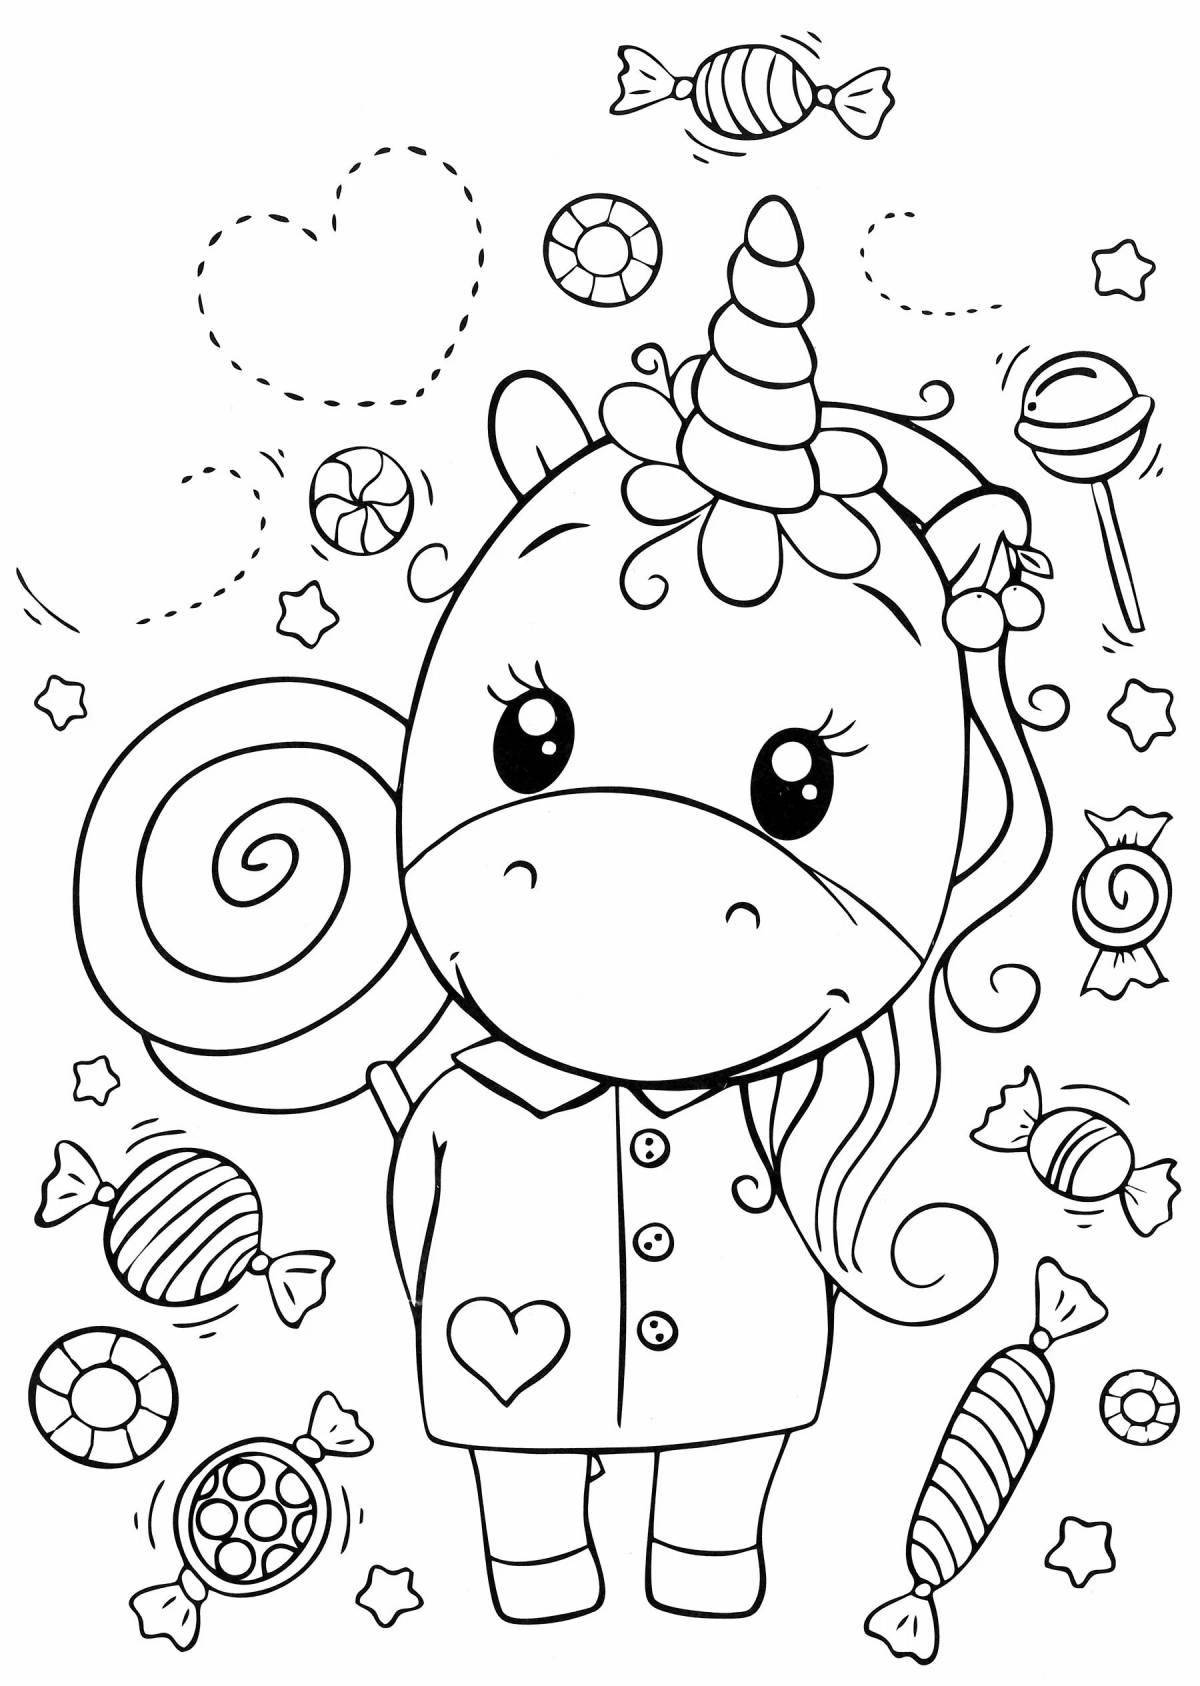 Animated wifey coloring page